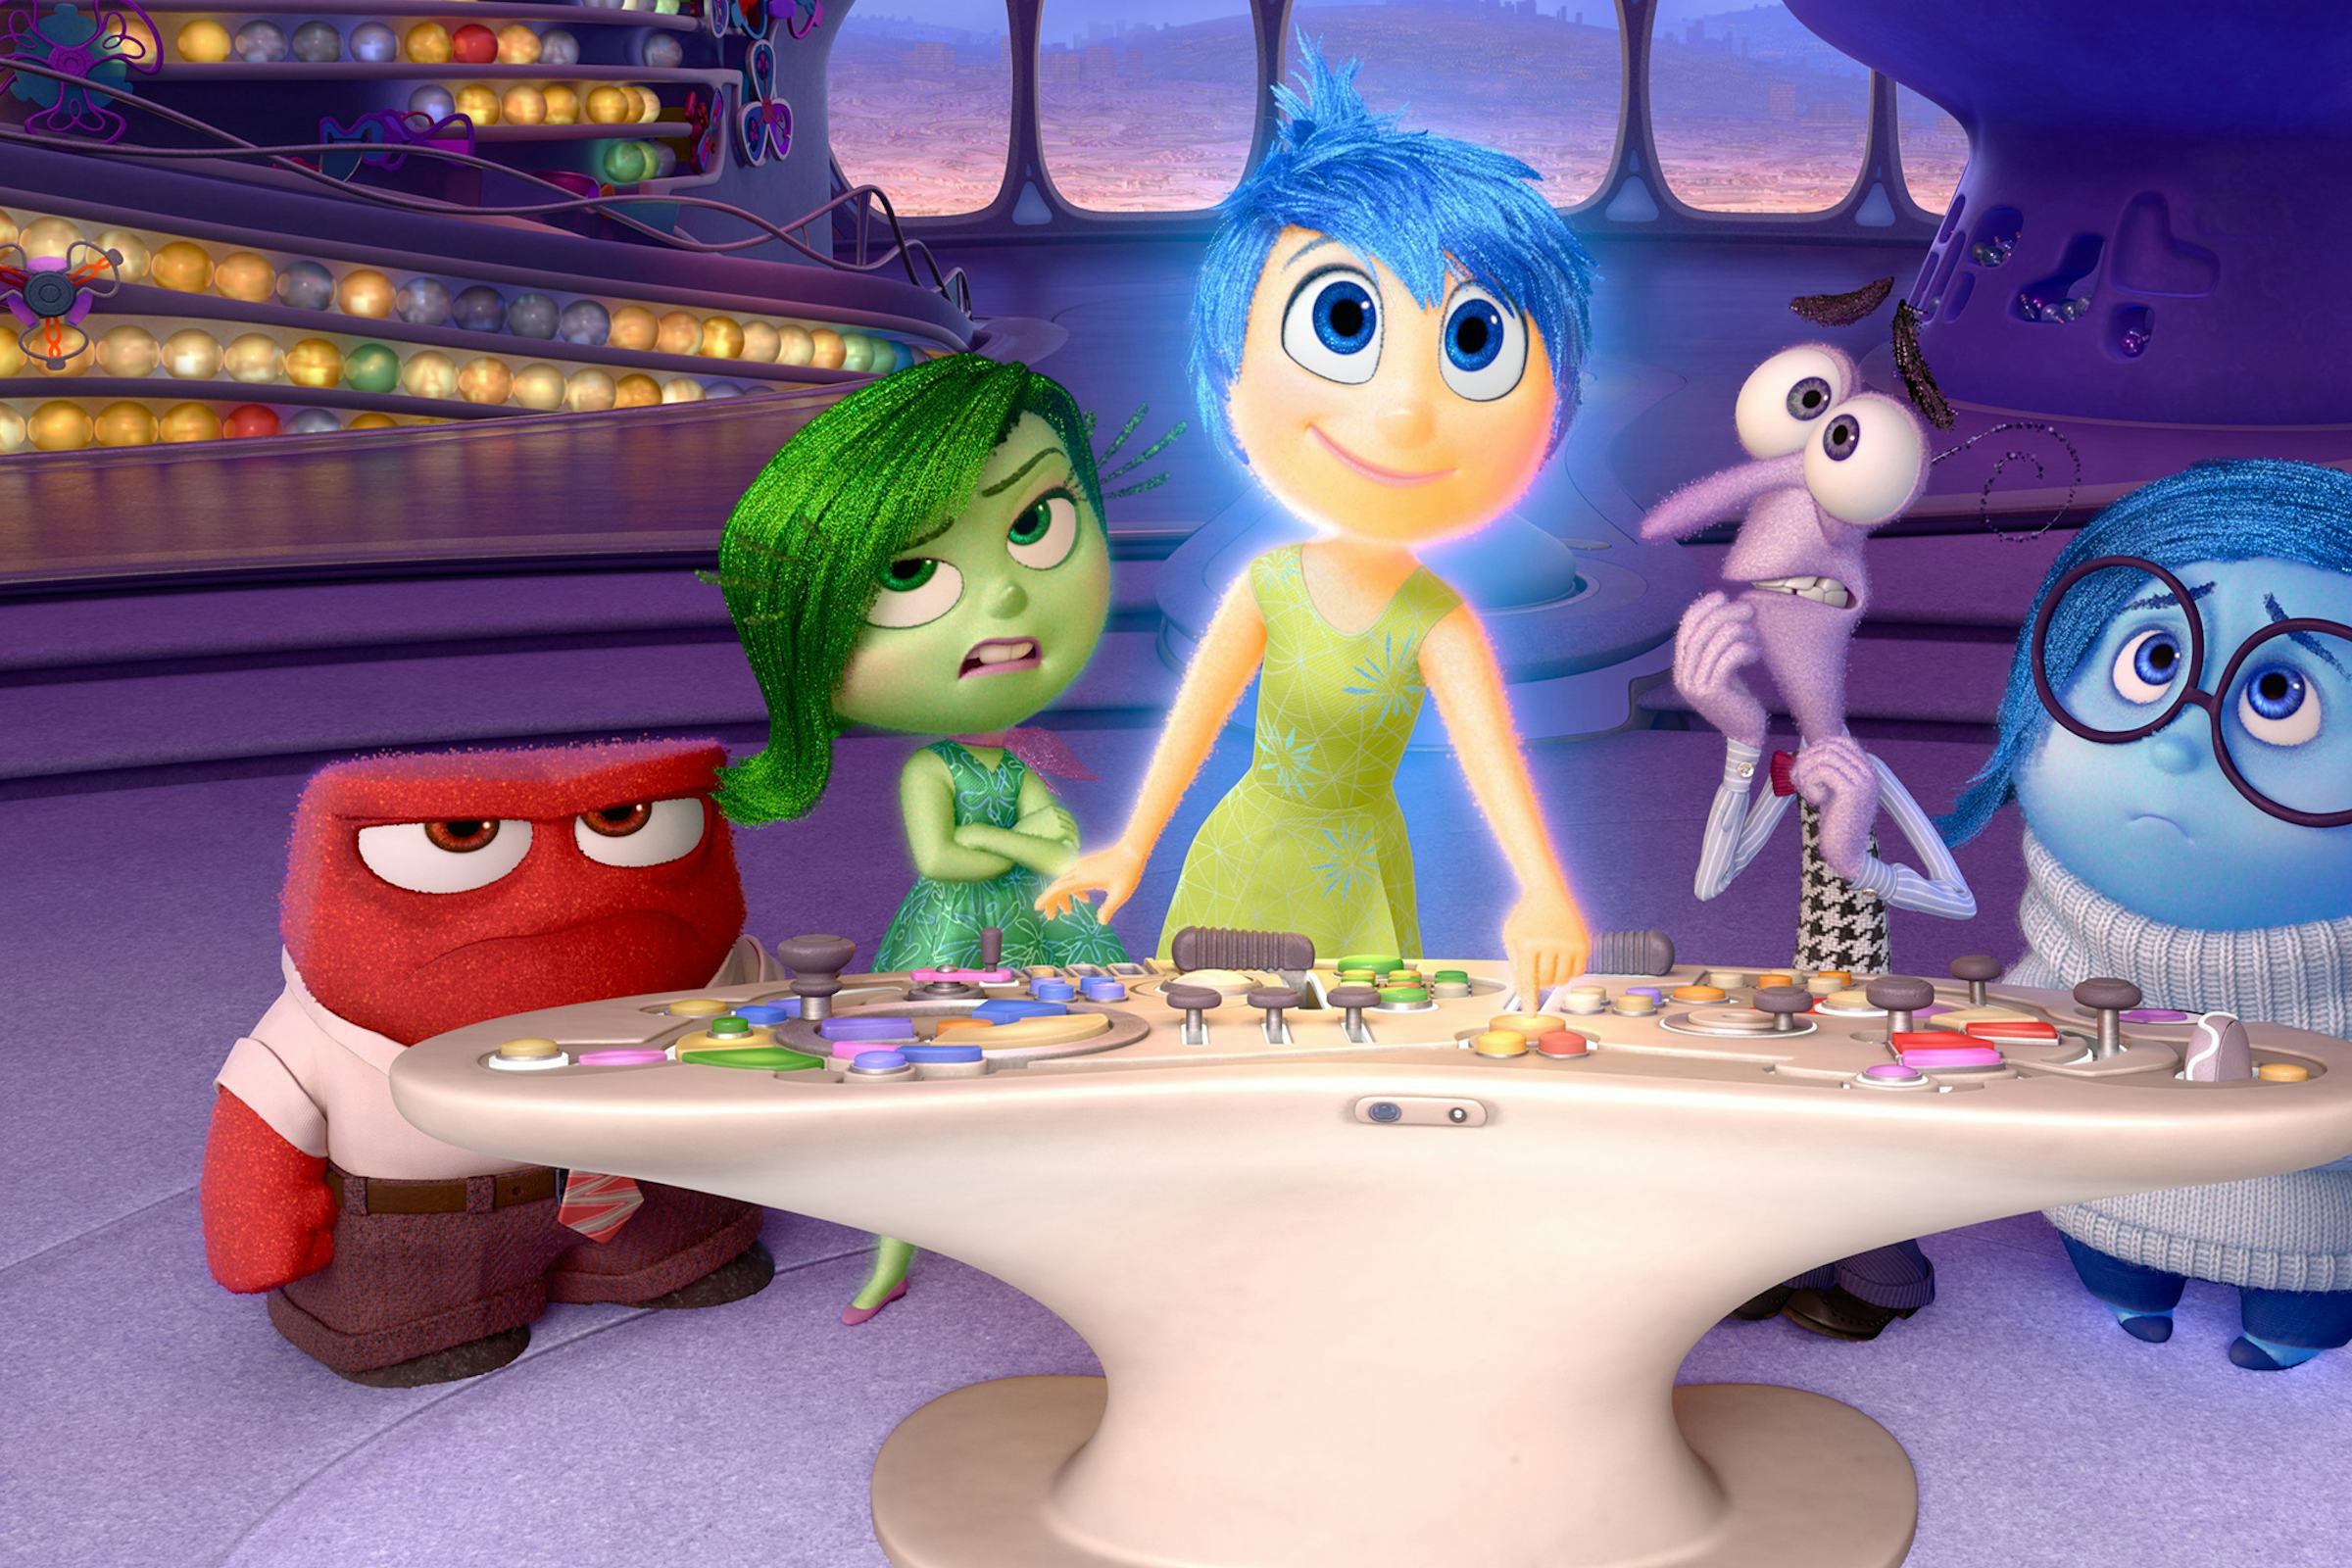 Cartoon characters representing different feelings stand around a control console